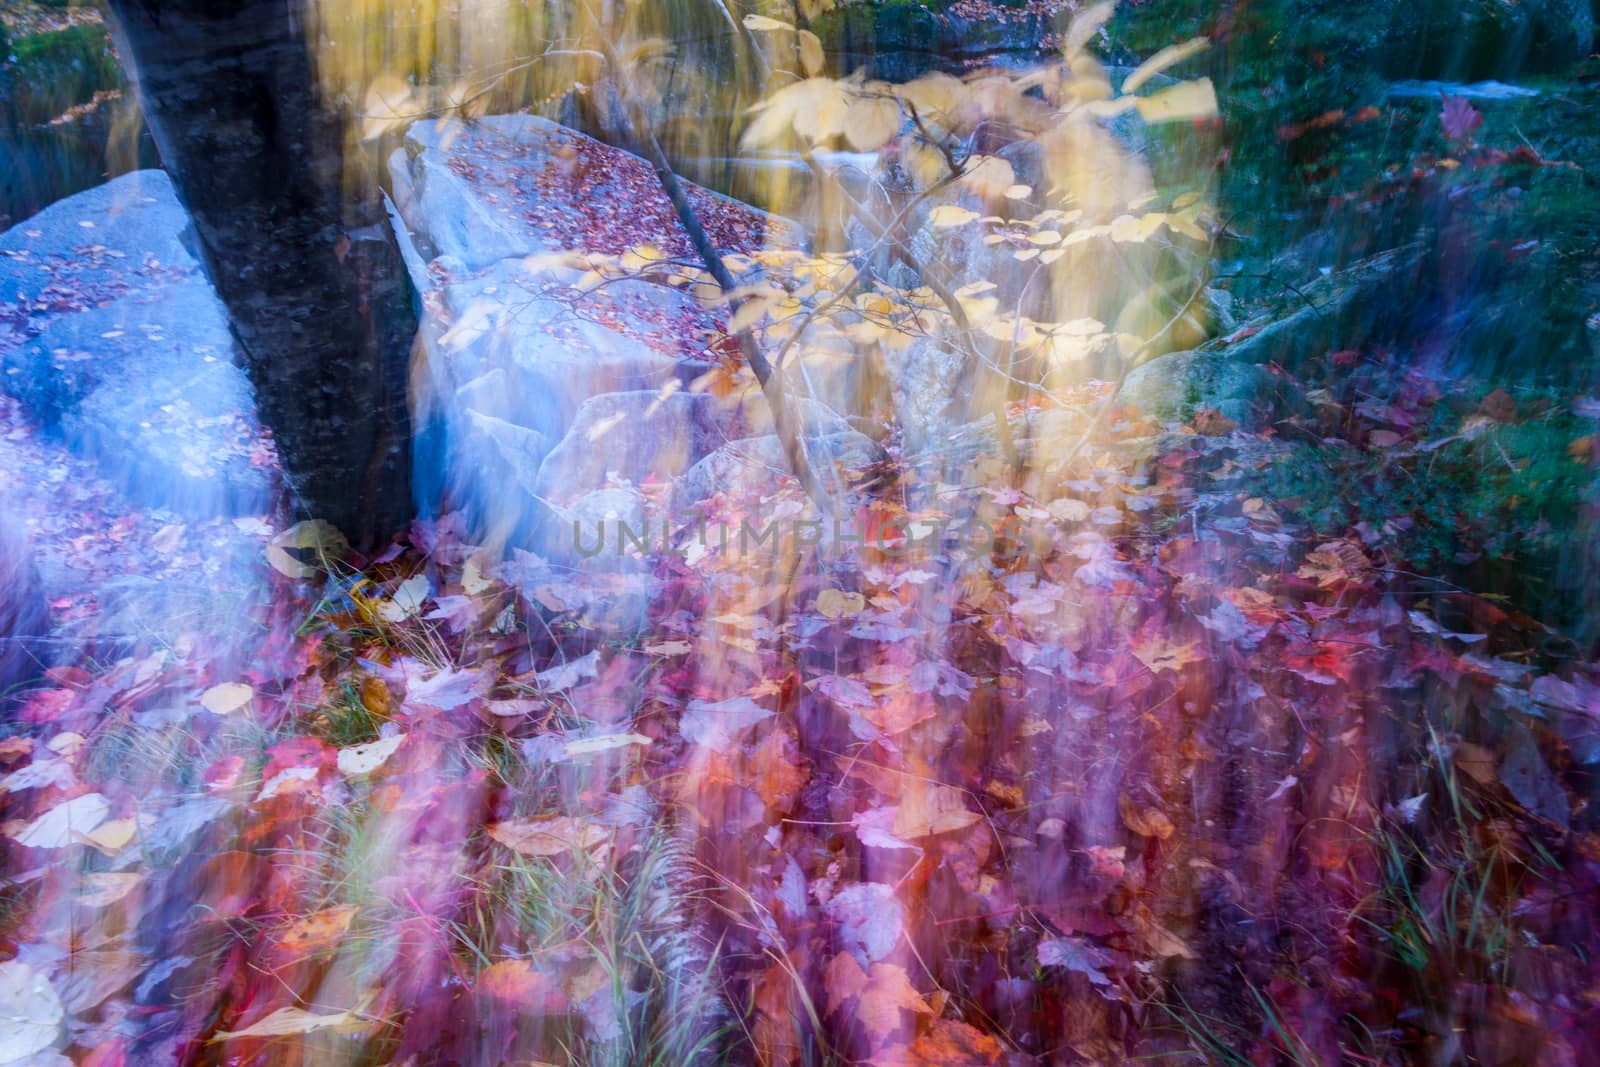 Abstract fall colors in intentional blur giving mystical or magical effect..